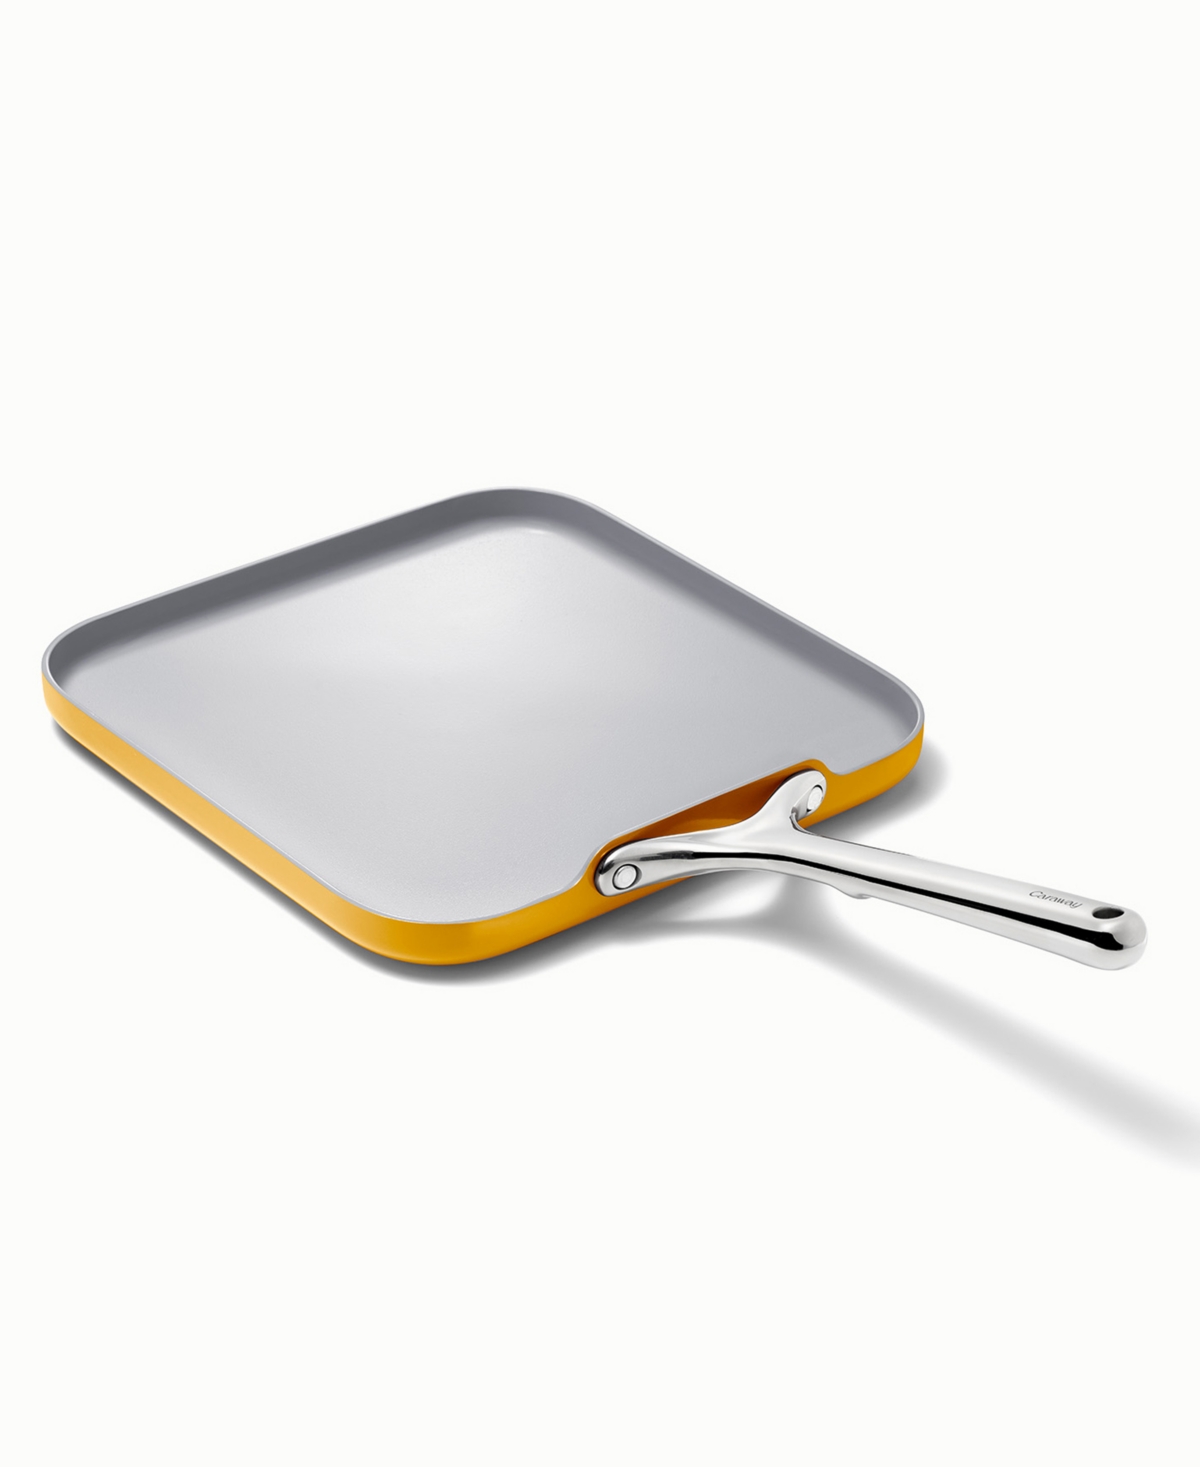 Caraway Non-stick Ceramic-coated 11" Square Griddle Pan In Marigold